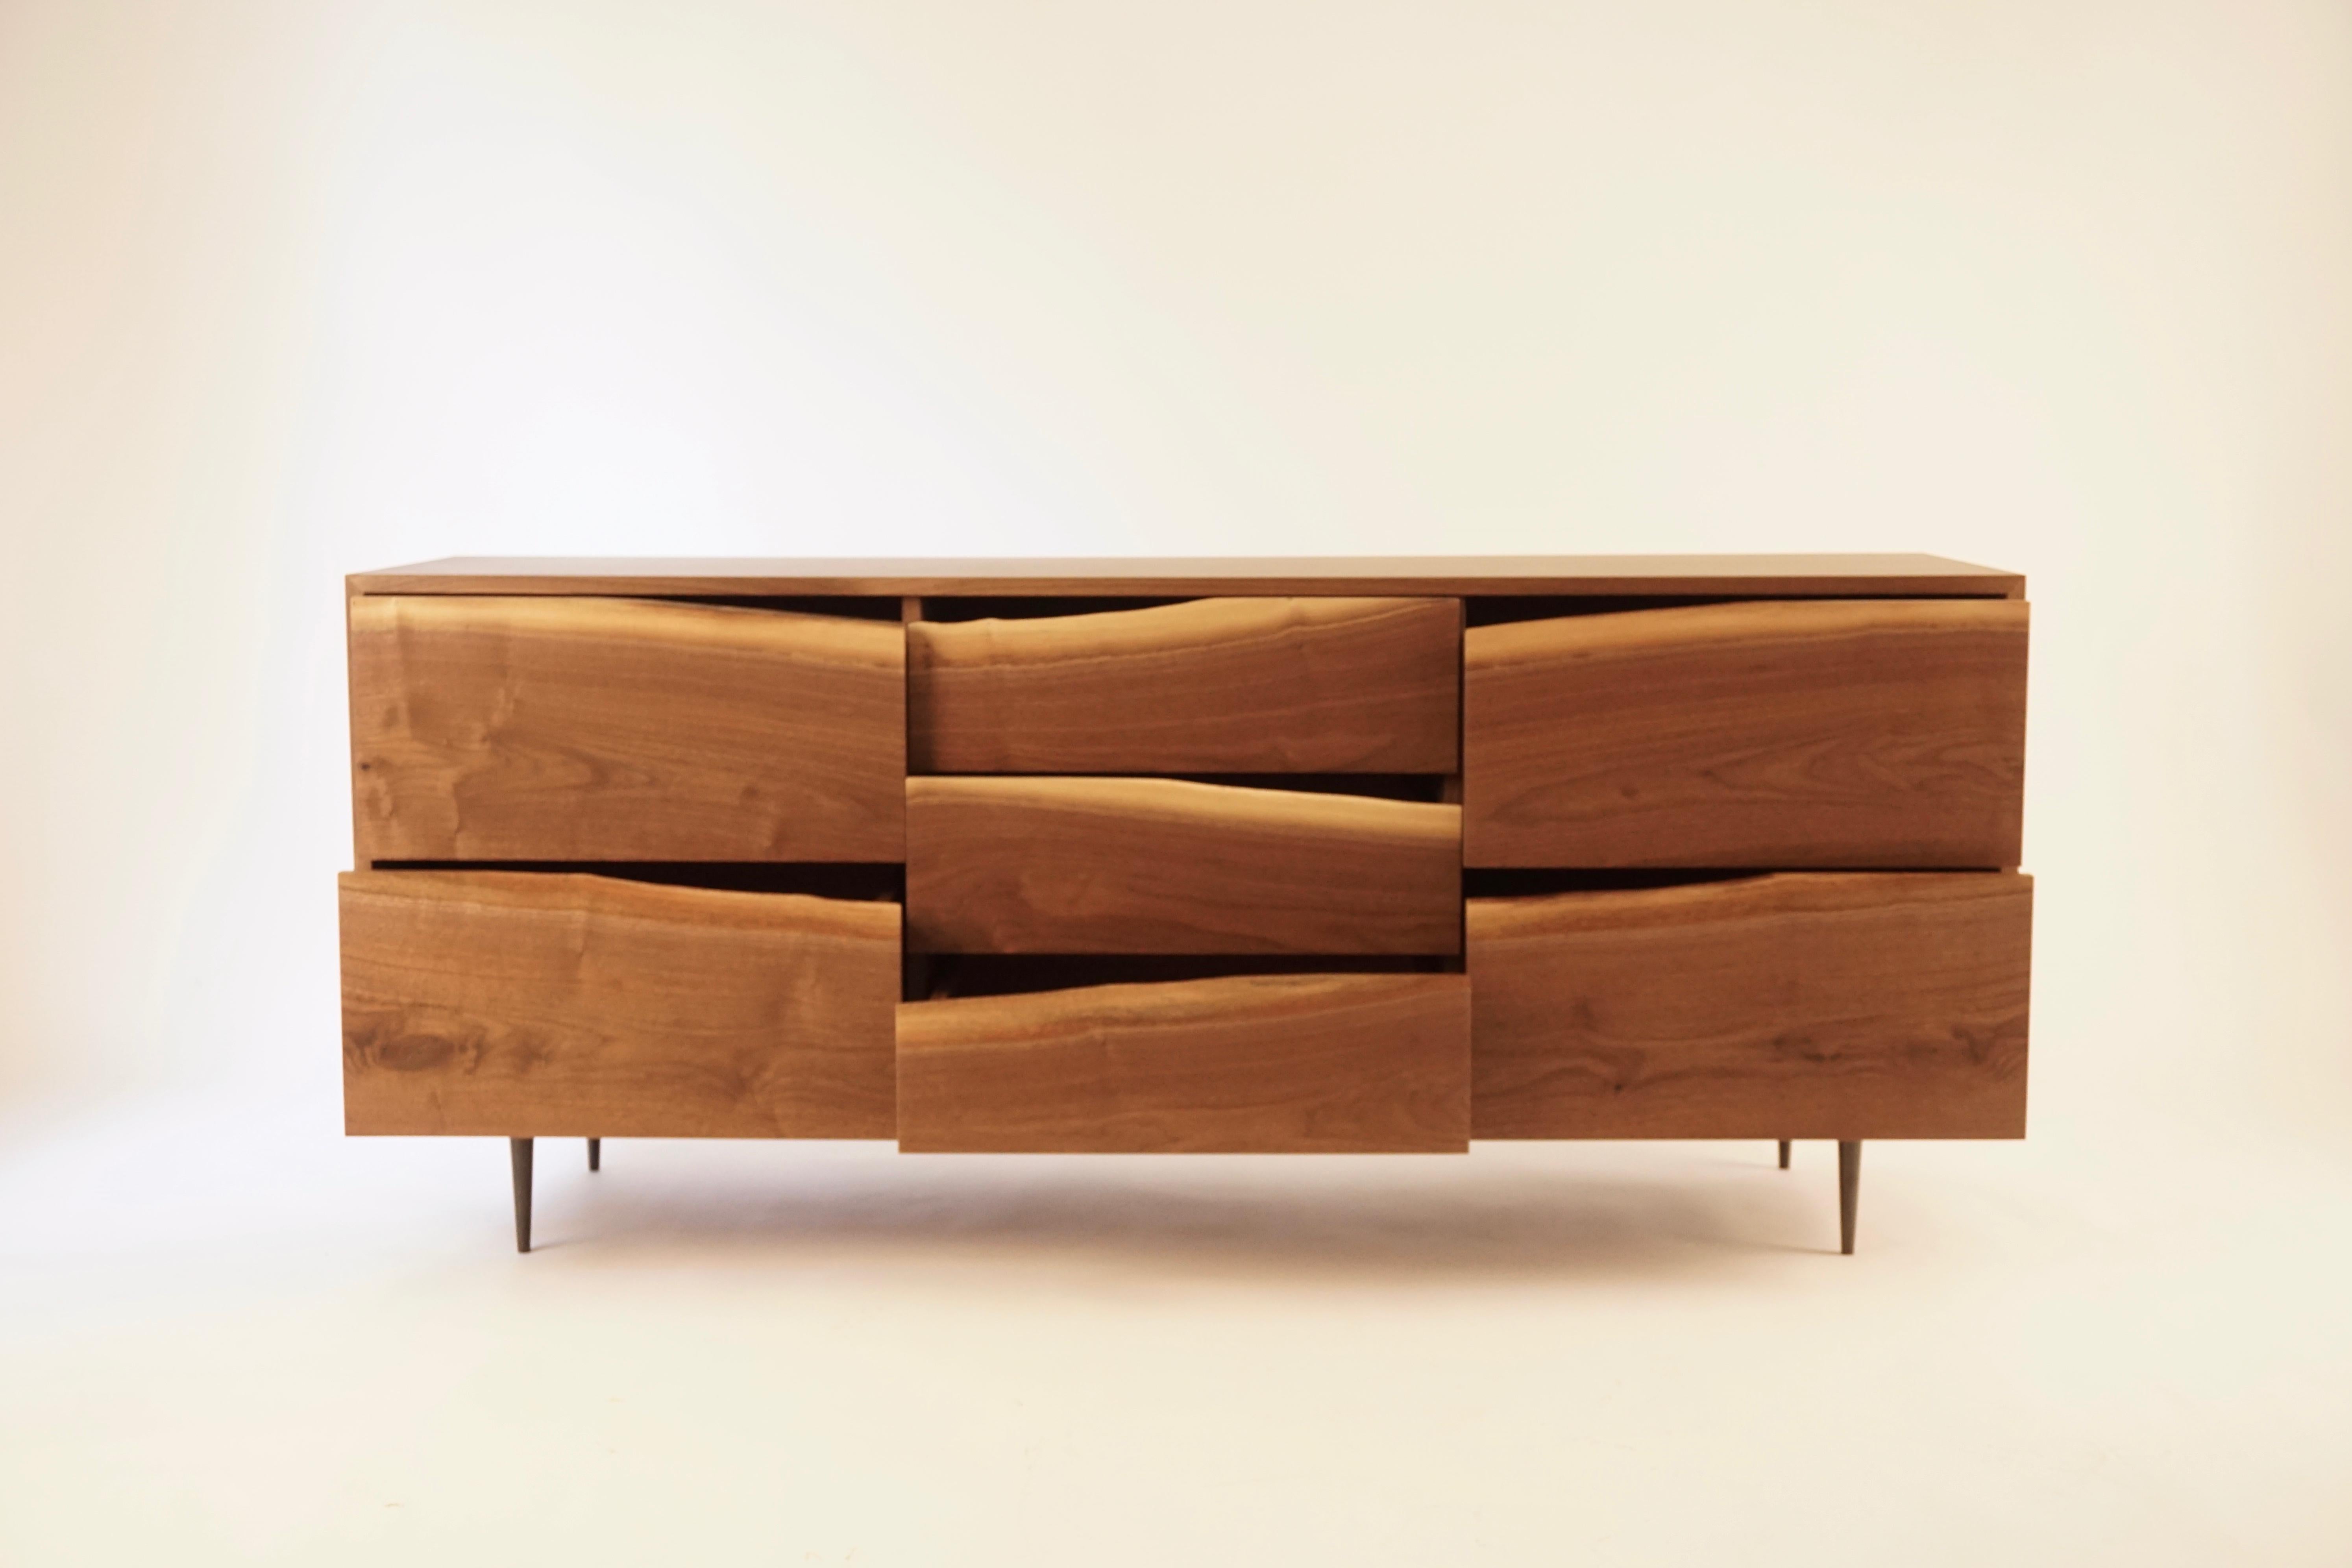 This credenza is from a collection of cabinets that emphasize the organic shape of the tree as a functional handle for the drawer faces. Each piece made from boards of the same tree, as they appear after milling. The bases are made from solid